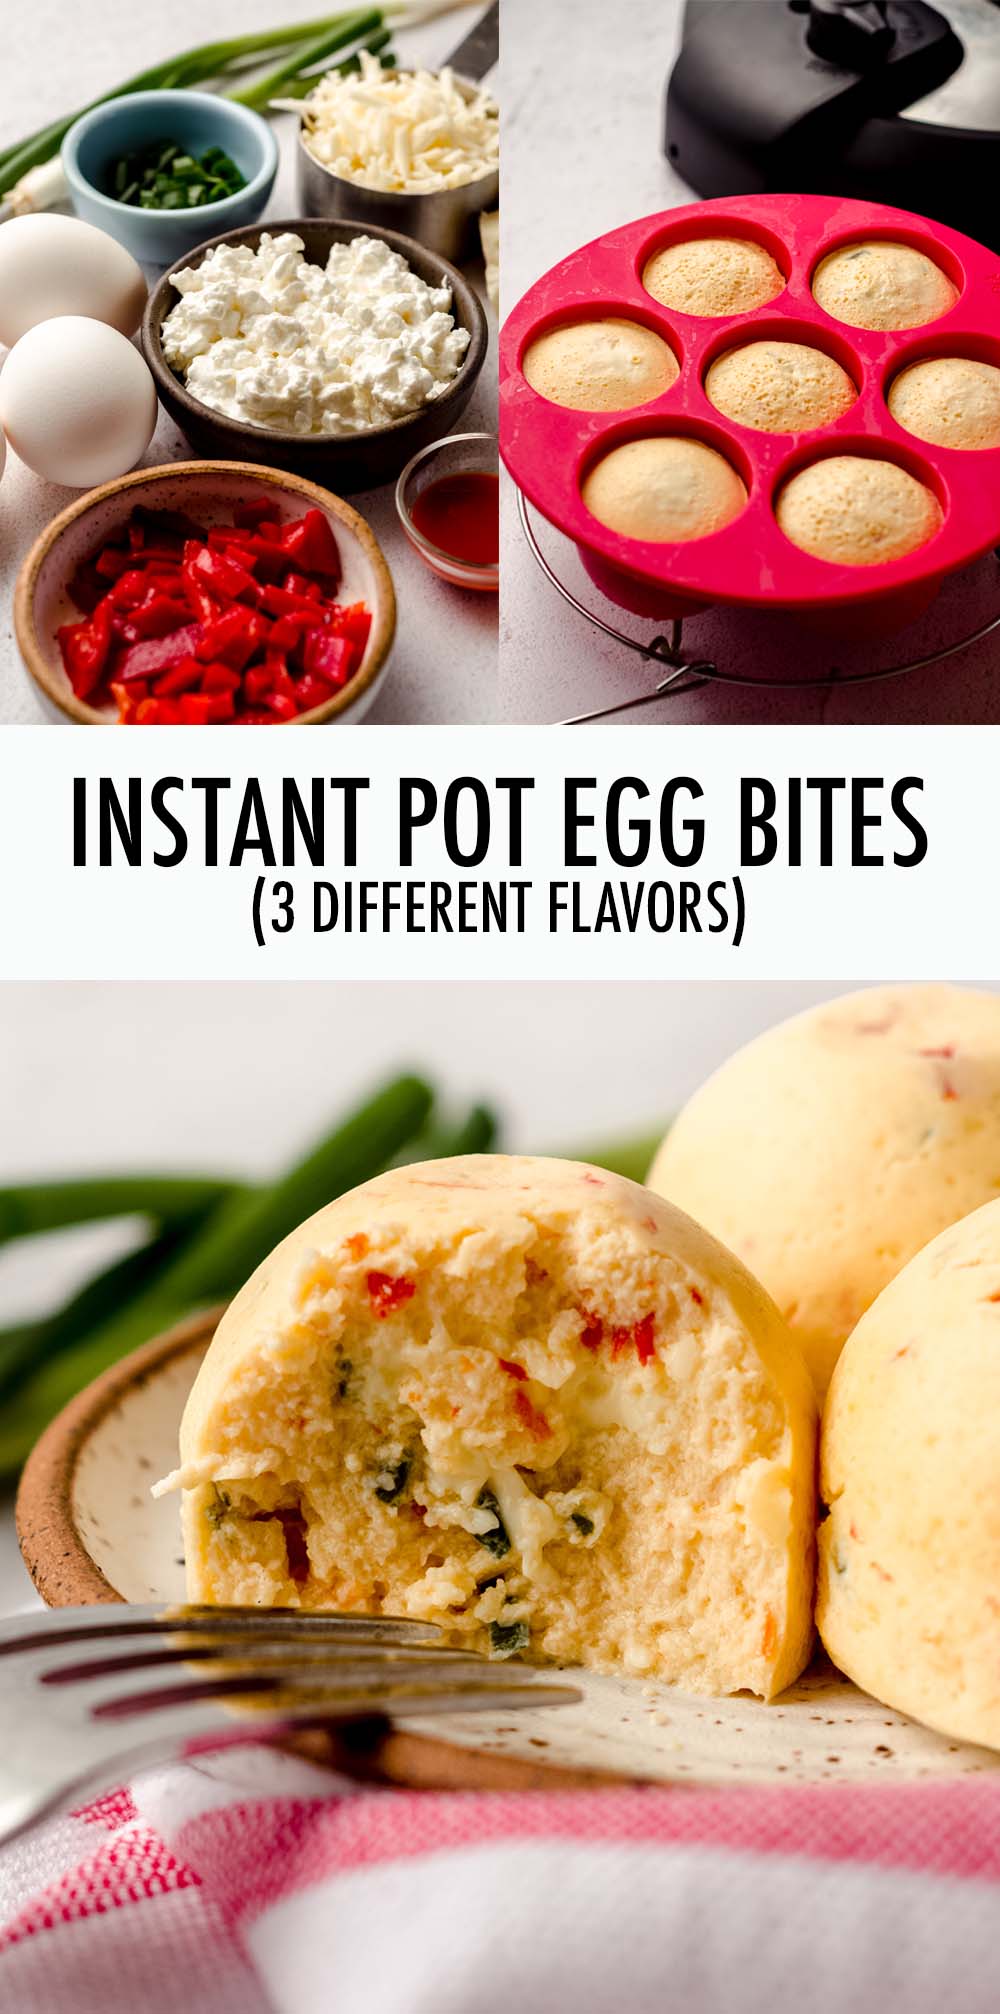 Just like your favorite sous vide egg bites from Starbucks, this copycat recipe for egg bites is done completely in the Instant Pot. Includes recipe for roasted red pepper, kale and mushroom, and bacon and gruyère bites. via @frshaprilflours